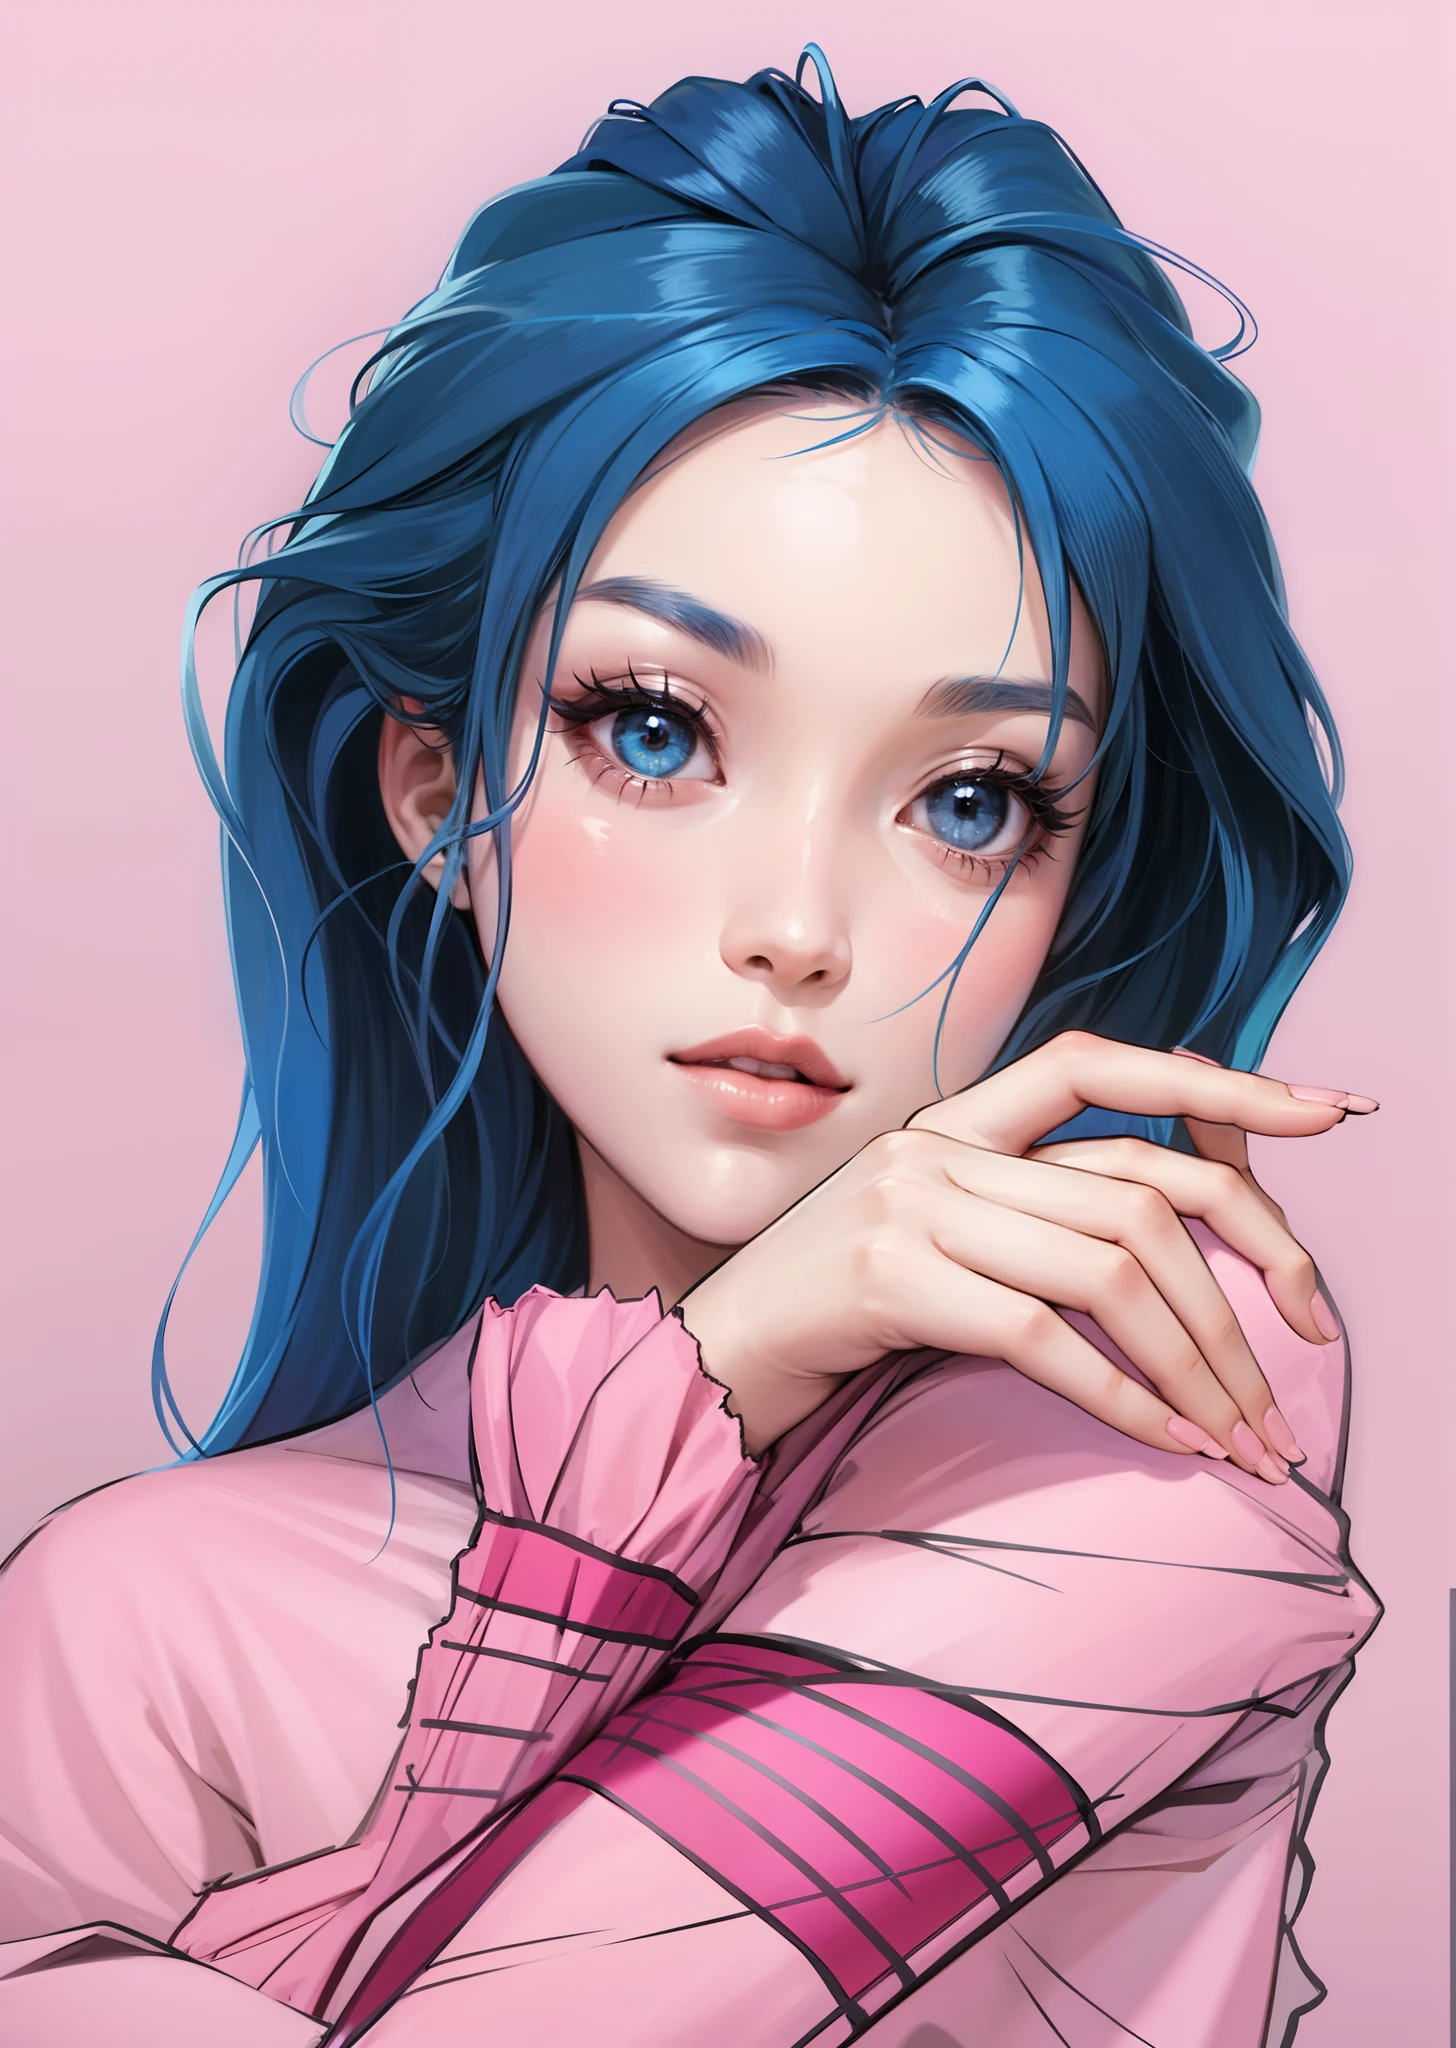 A blue-haired girl,Pink clothes